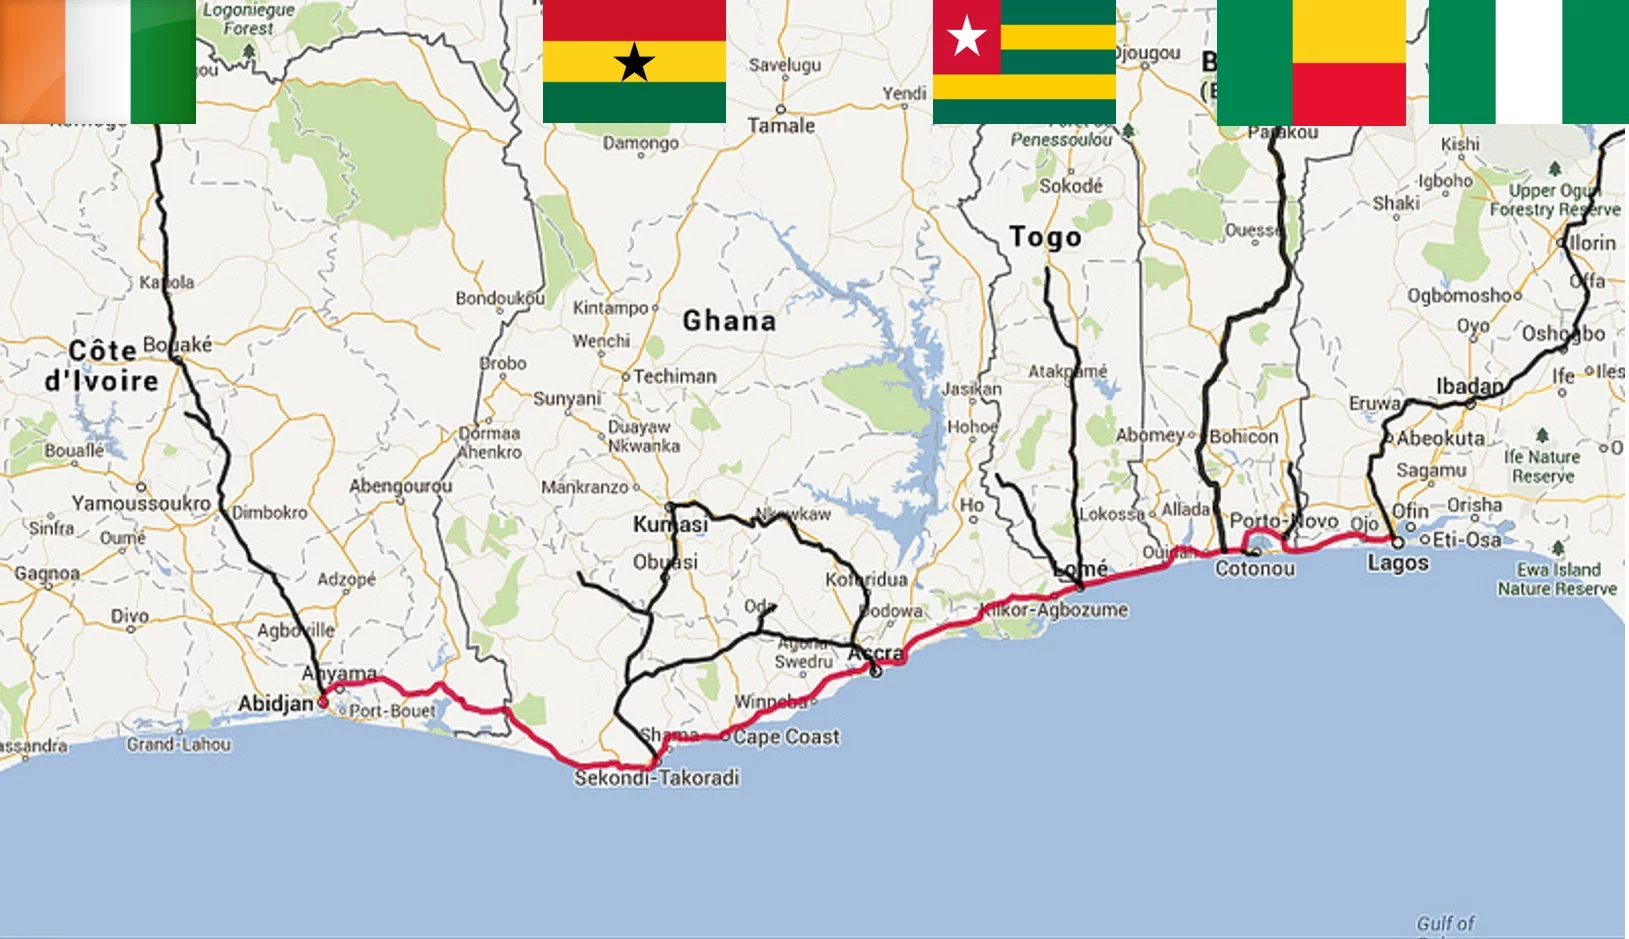 Highways of Opportunity in Africa - Lagos-Abidjan Highway. (Photo Internet reproduction)